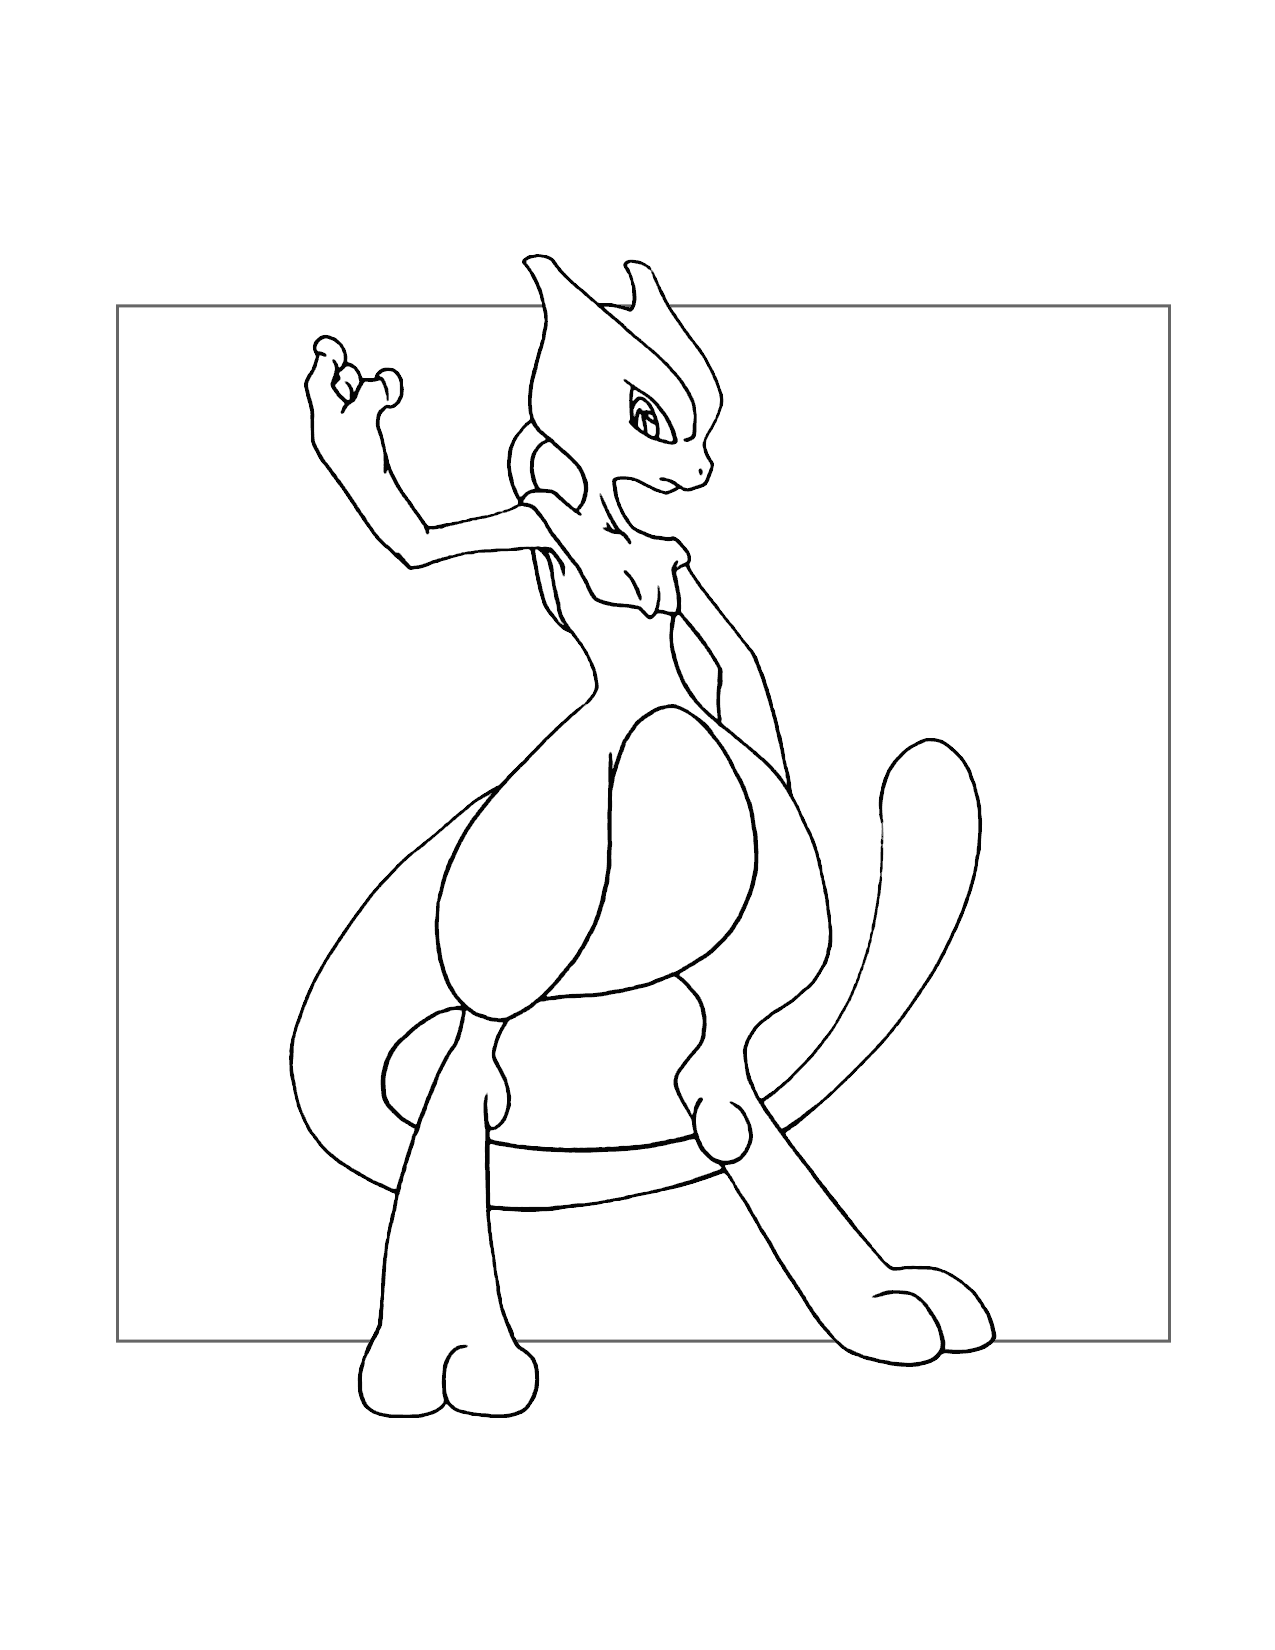 Psychic Mewtwo Pokemon Coloring Page